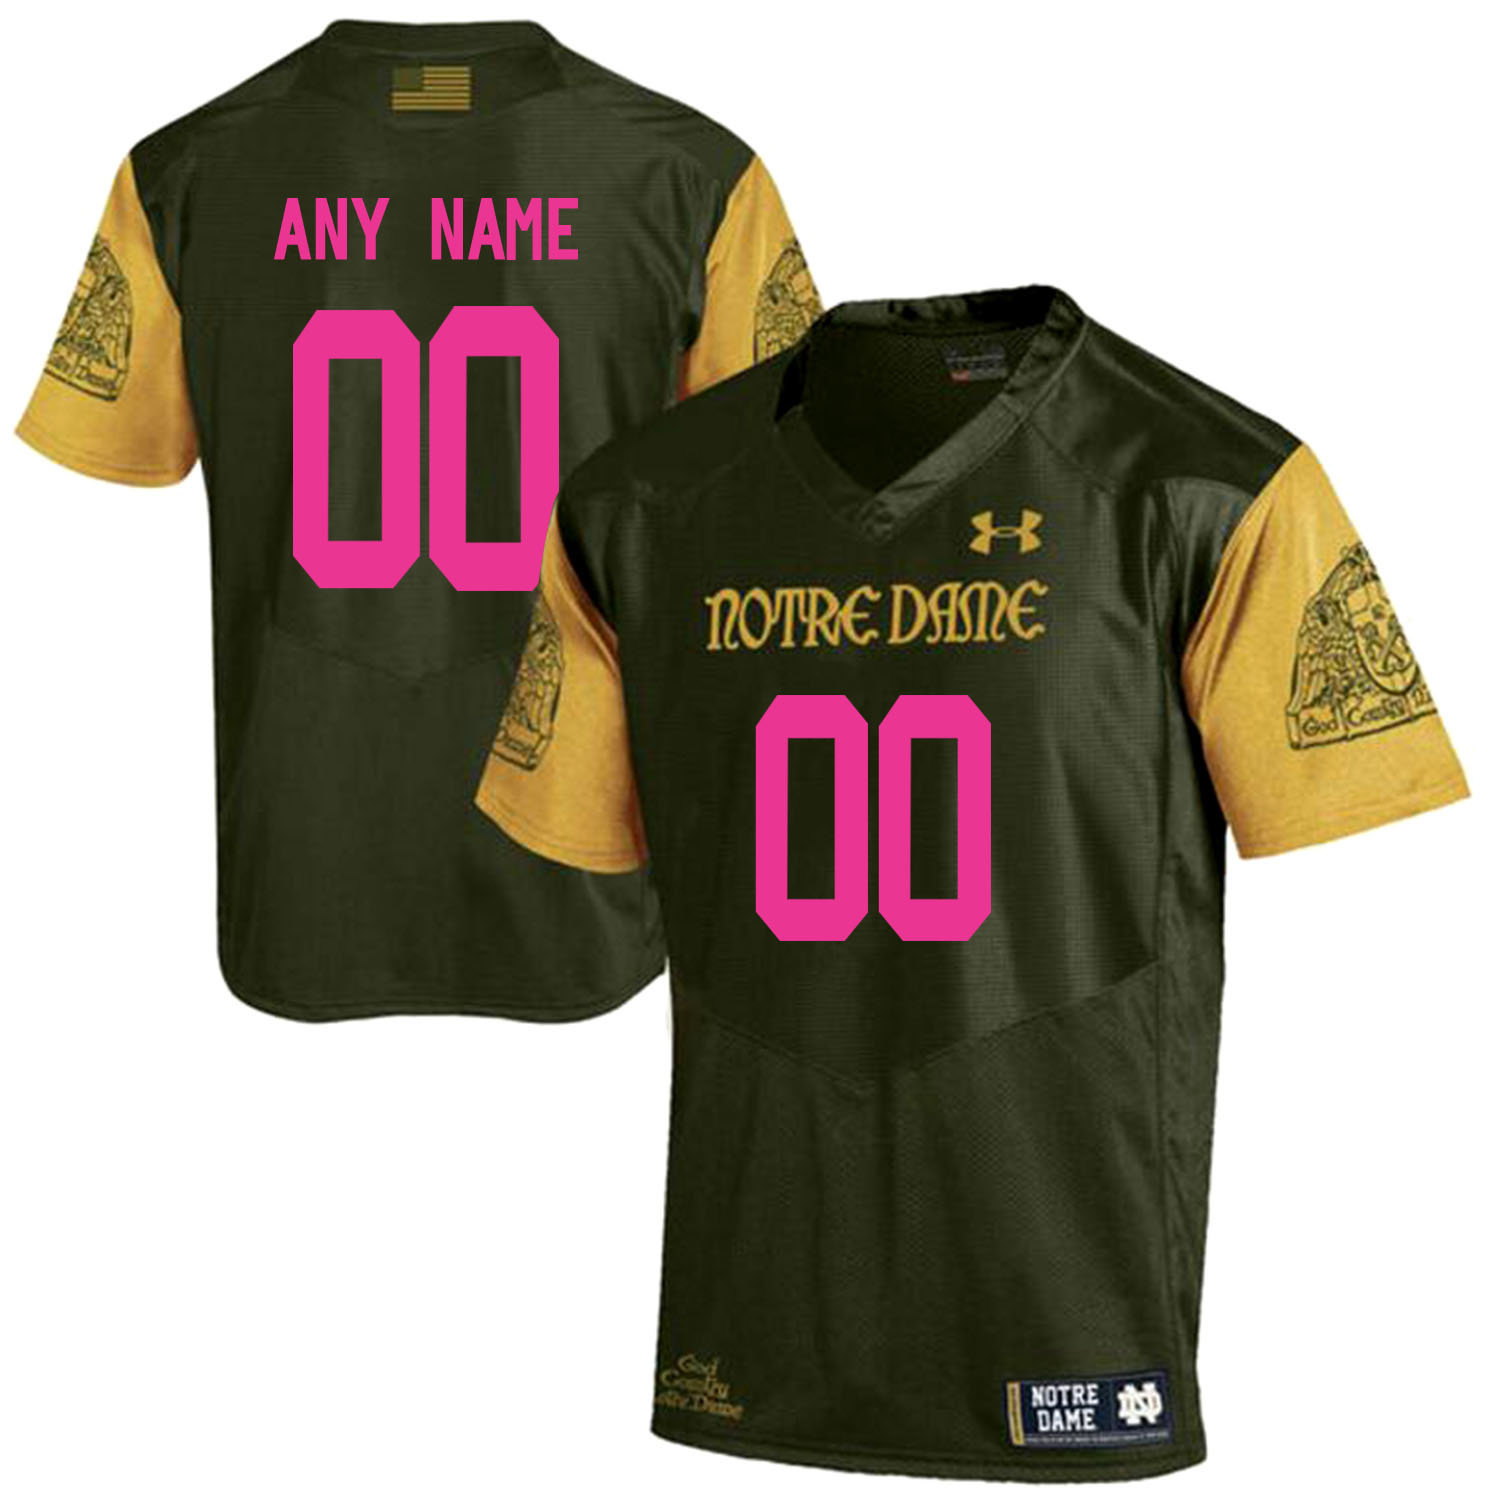 Notre Dame Fighting Irish Olive Green 2018 Breast Cancer Awareness Men's Customized College Football Jersey